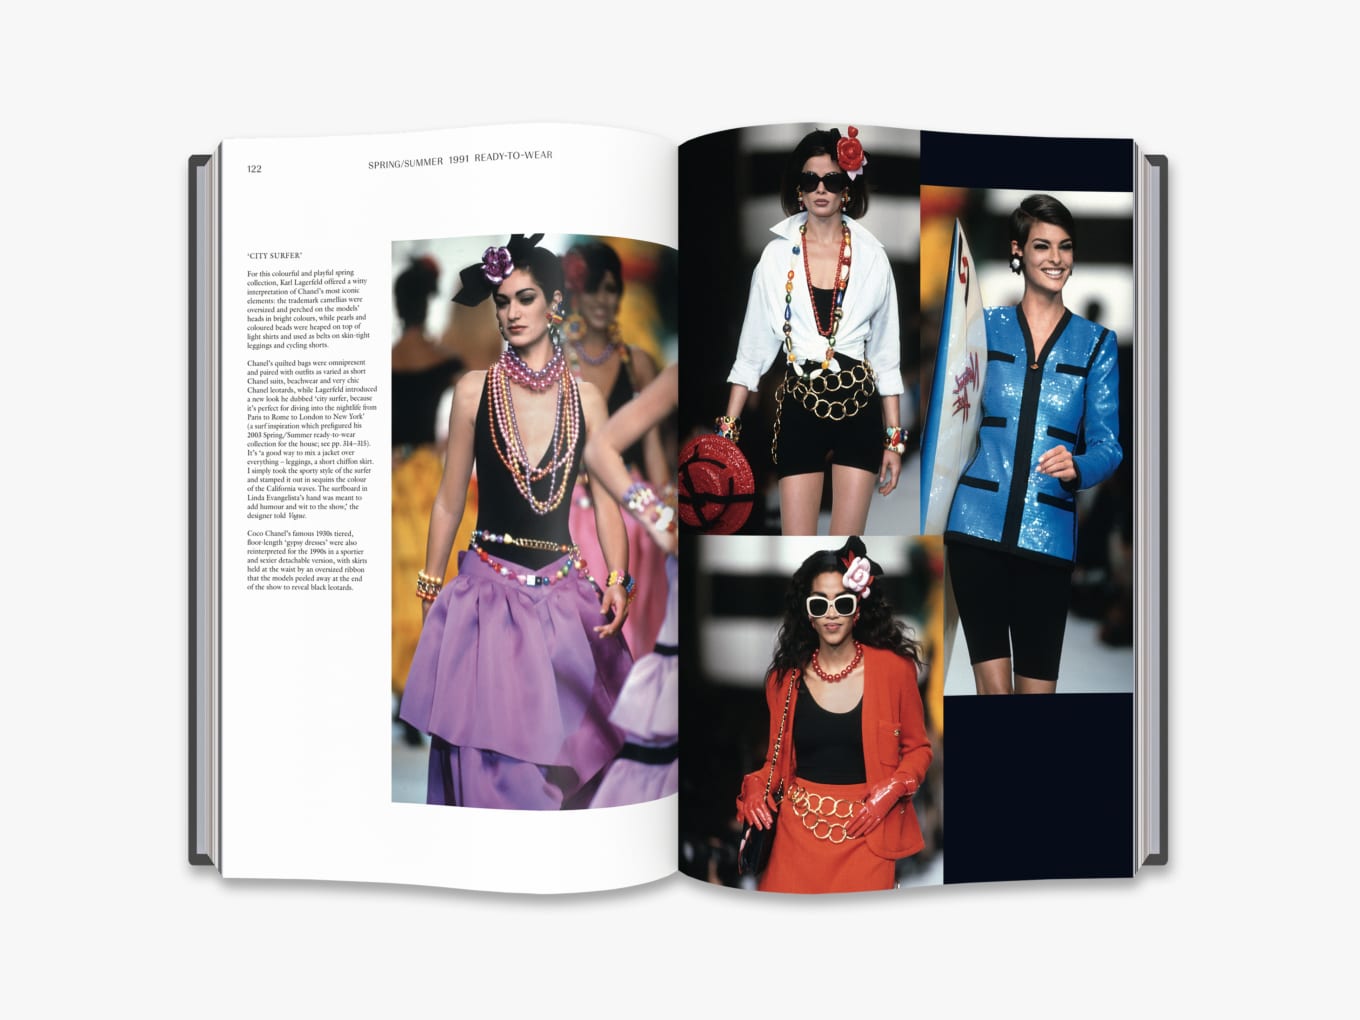 New Mags Chanel Catwalk Coffee Table book Sort - [modostore.no]